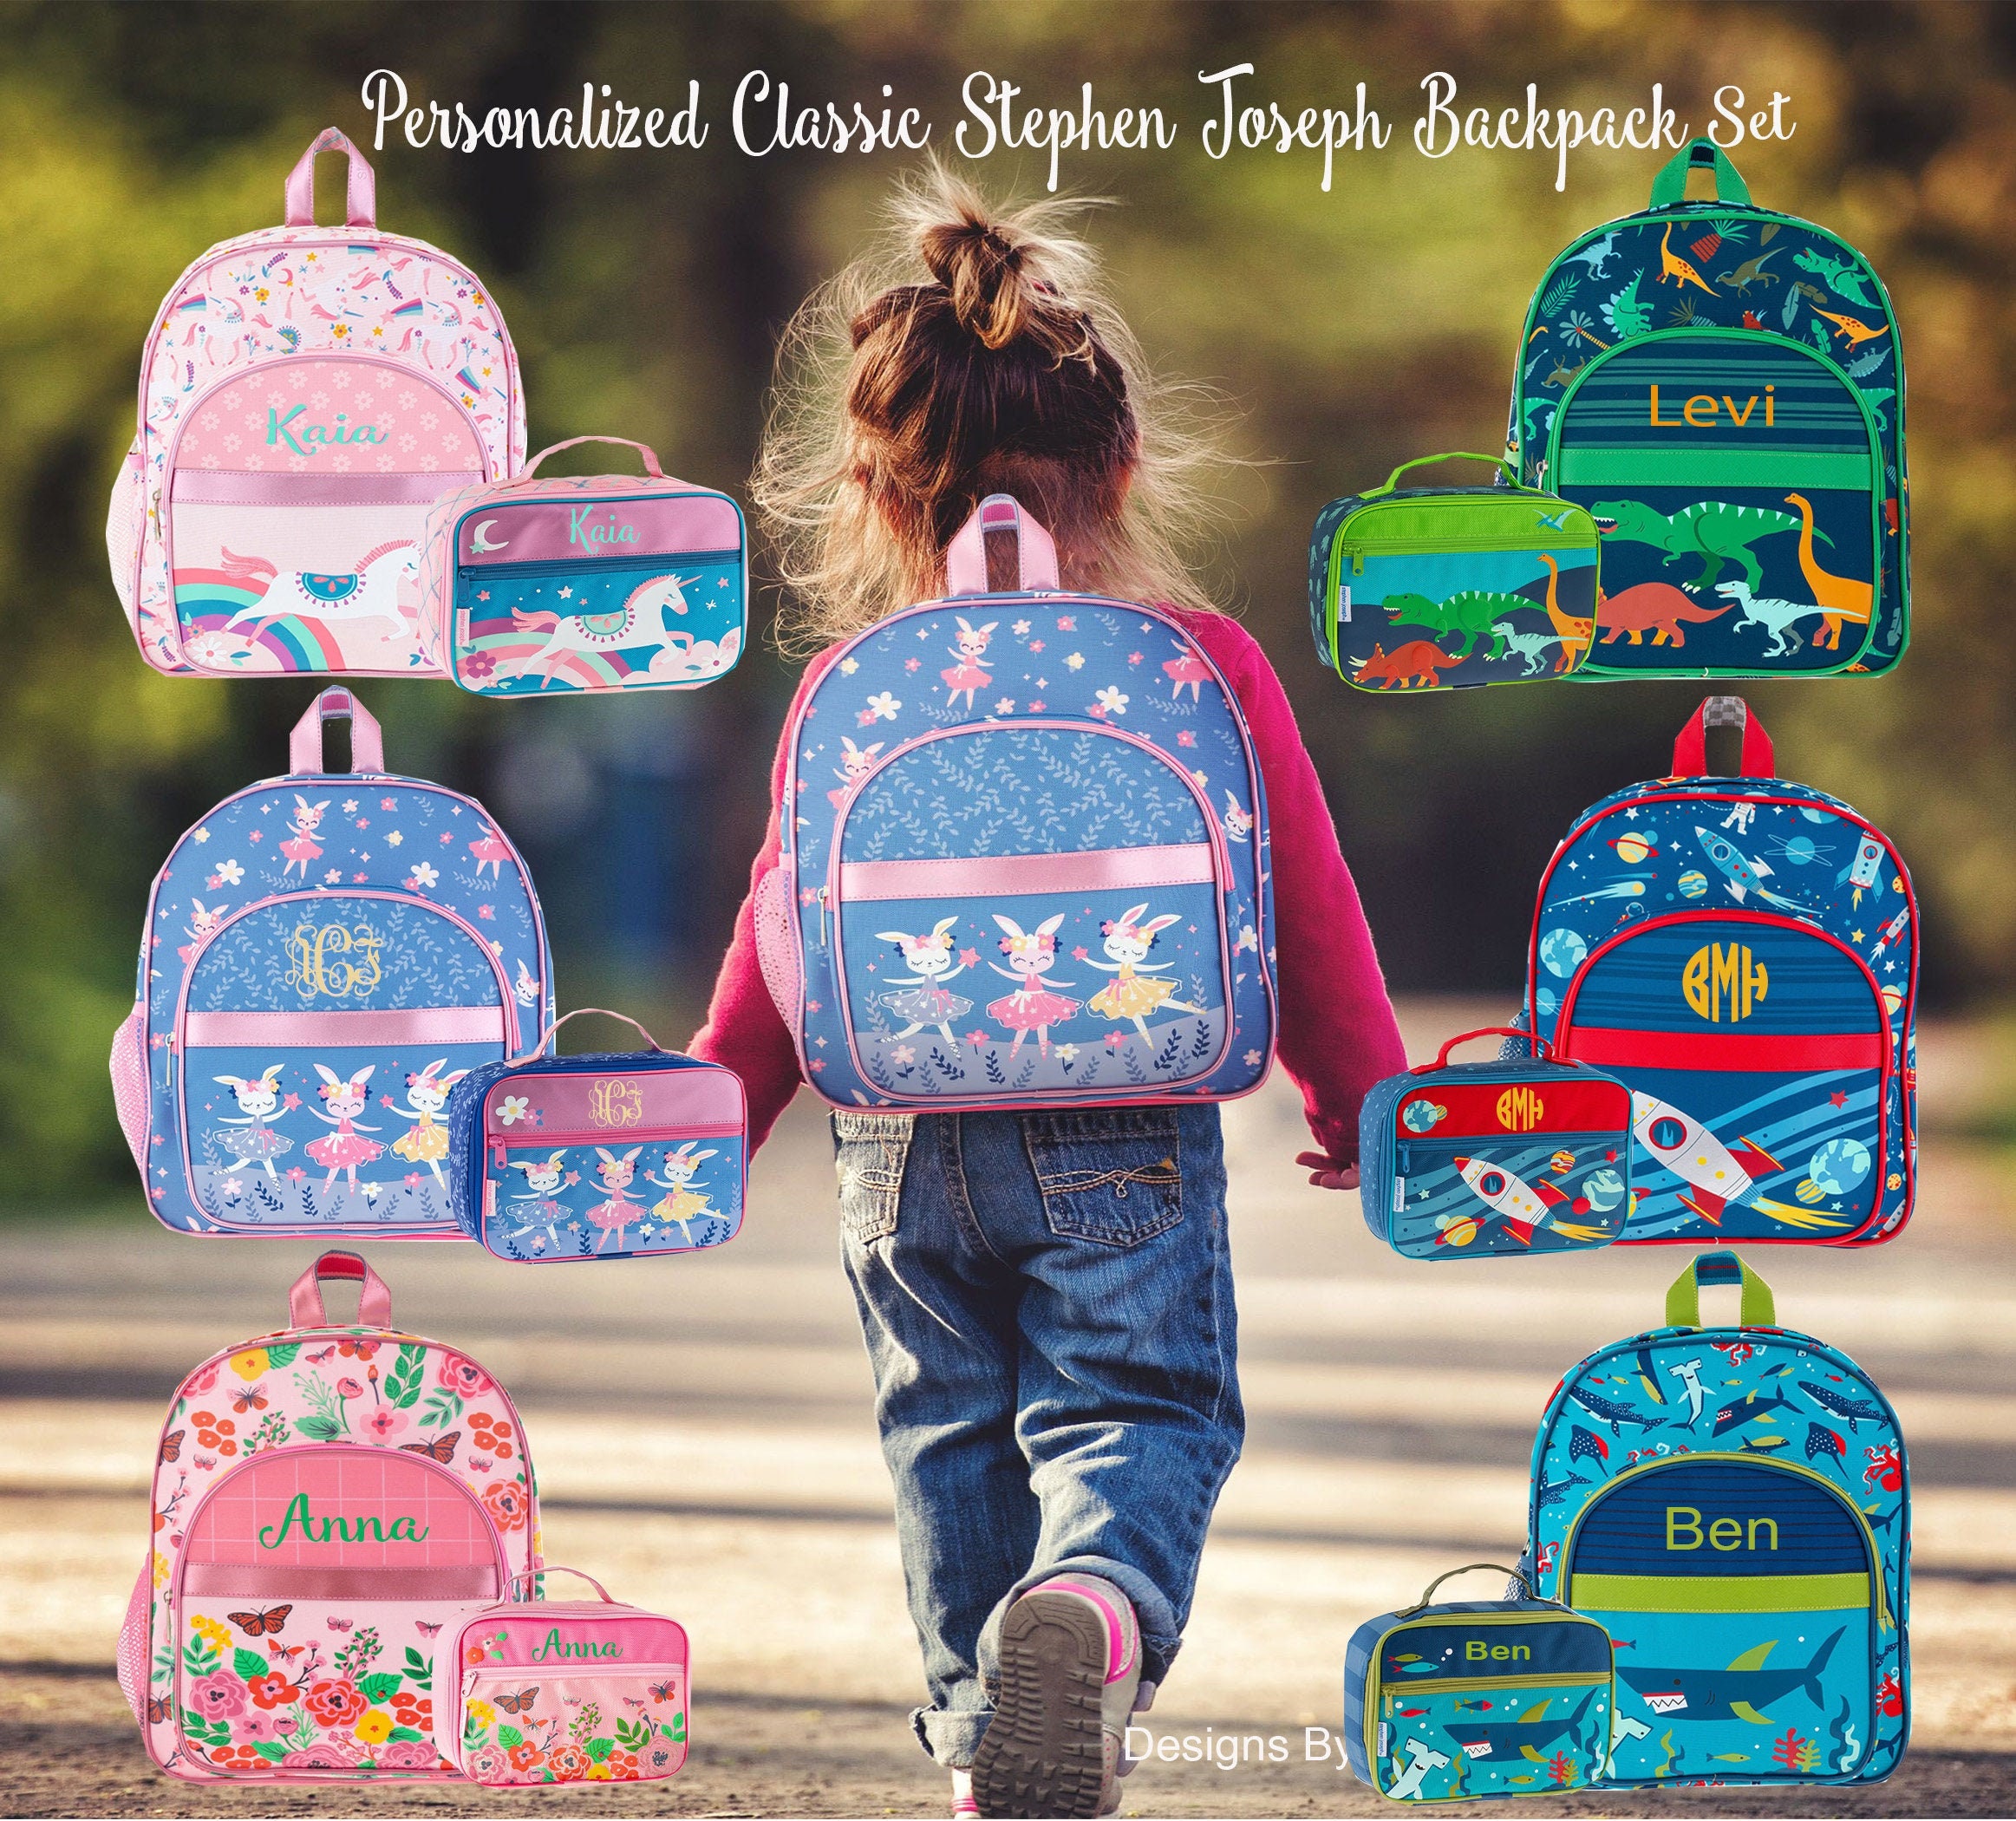 Simply Southern: Backpack/ Lunch Box – KK's